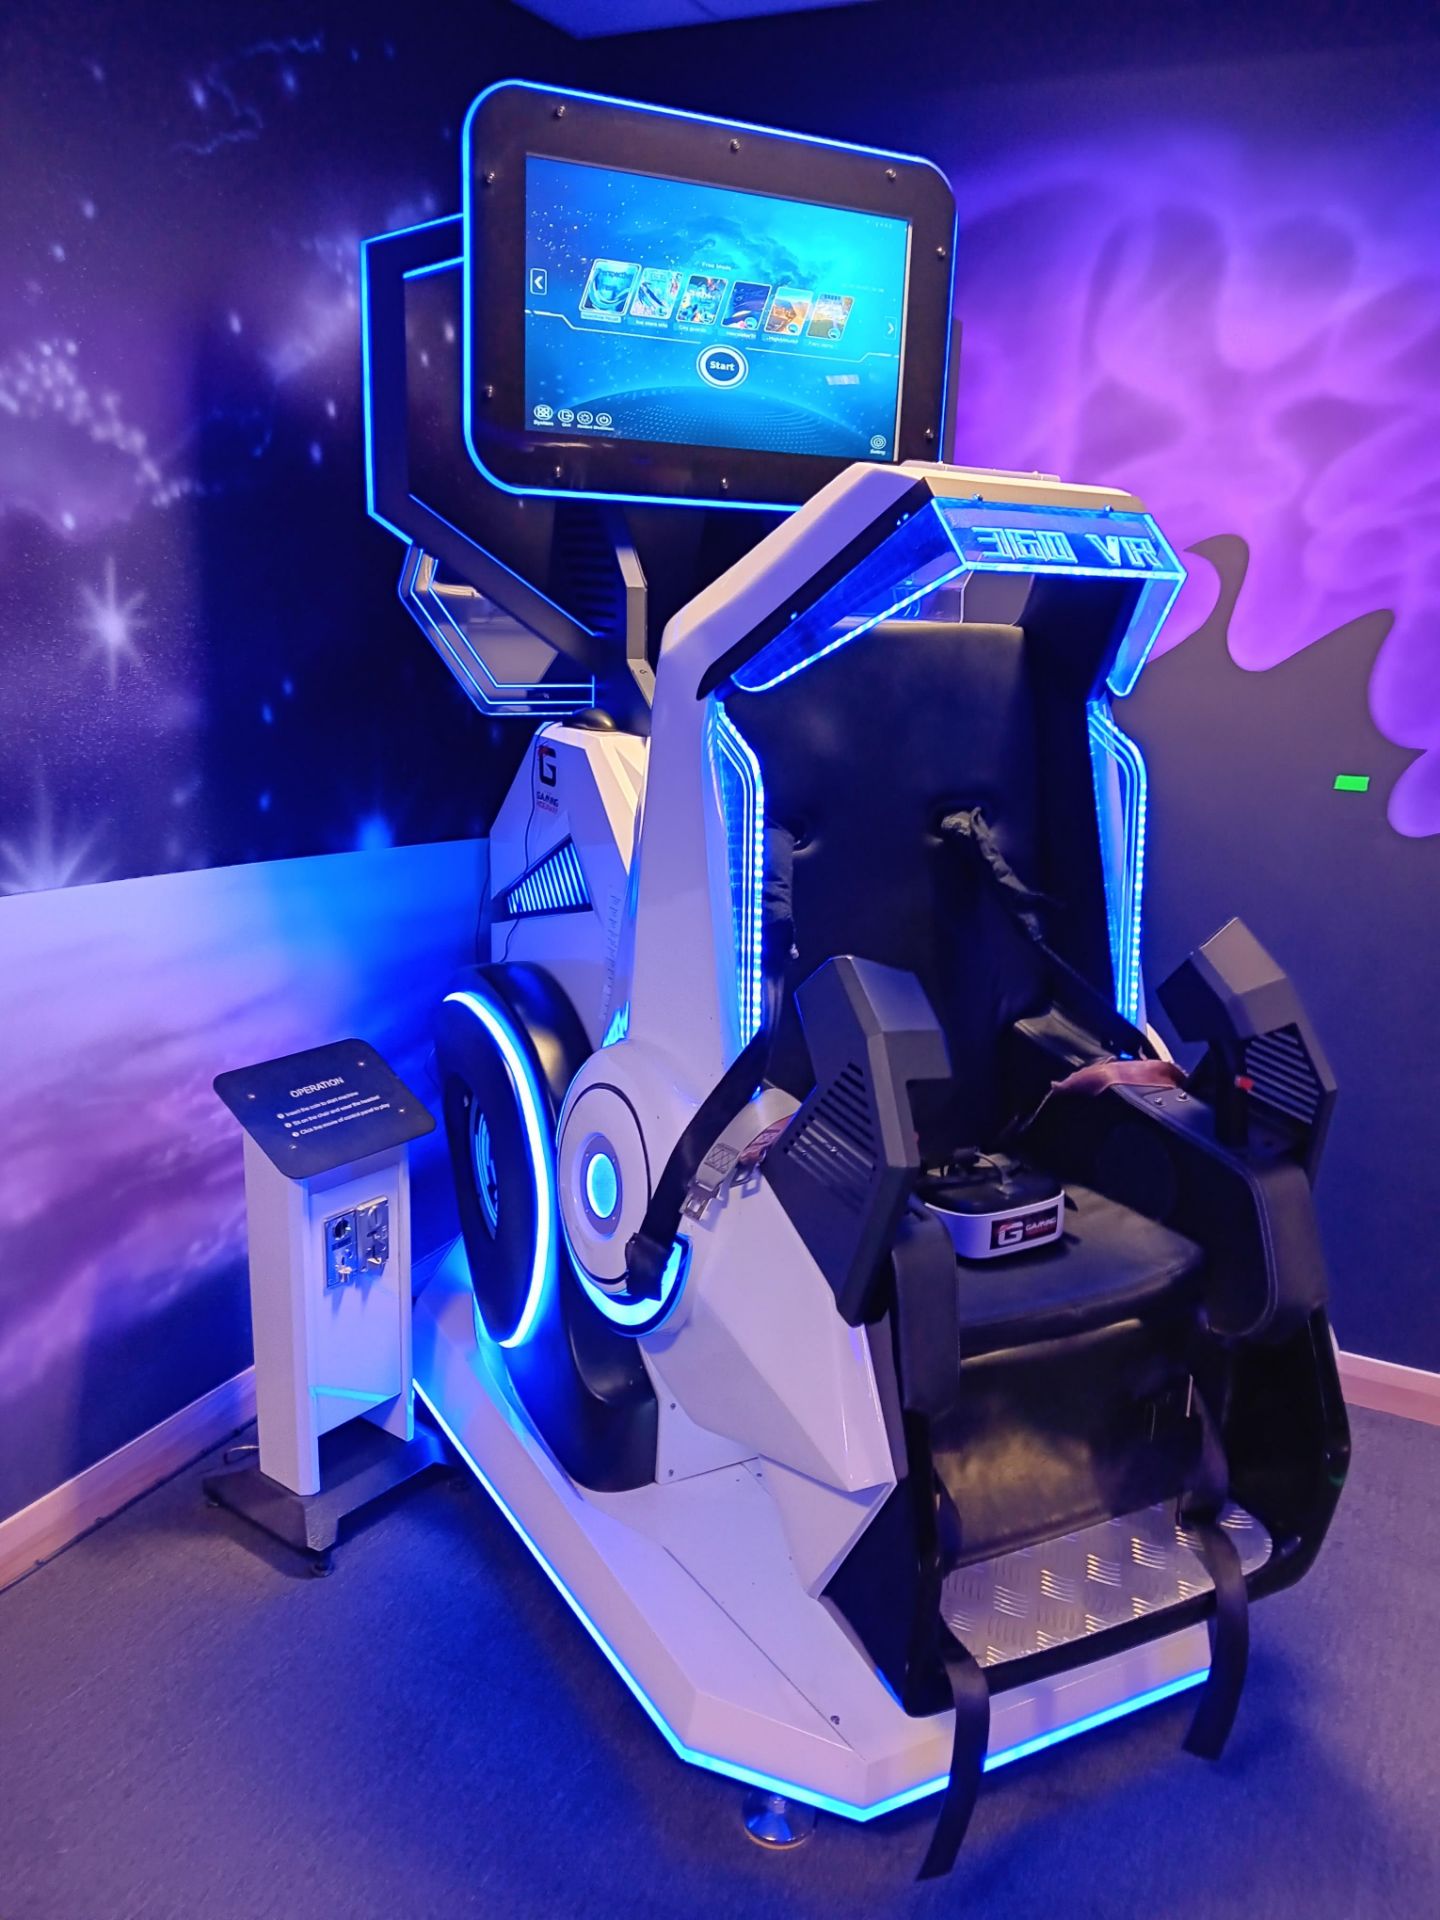 Owatch 360 Degree Rotating VR Chair Roller Coaster Simulator – Cost New £14,400 – Buyer to - Image 2 of 4